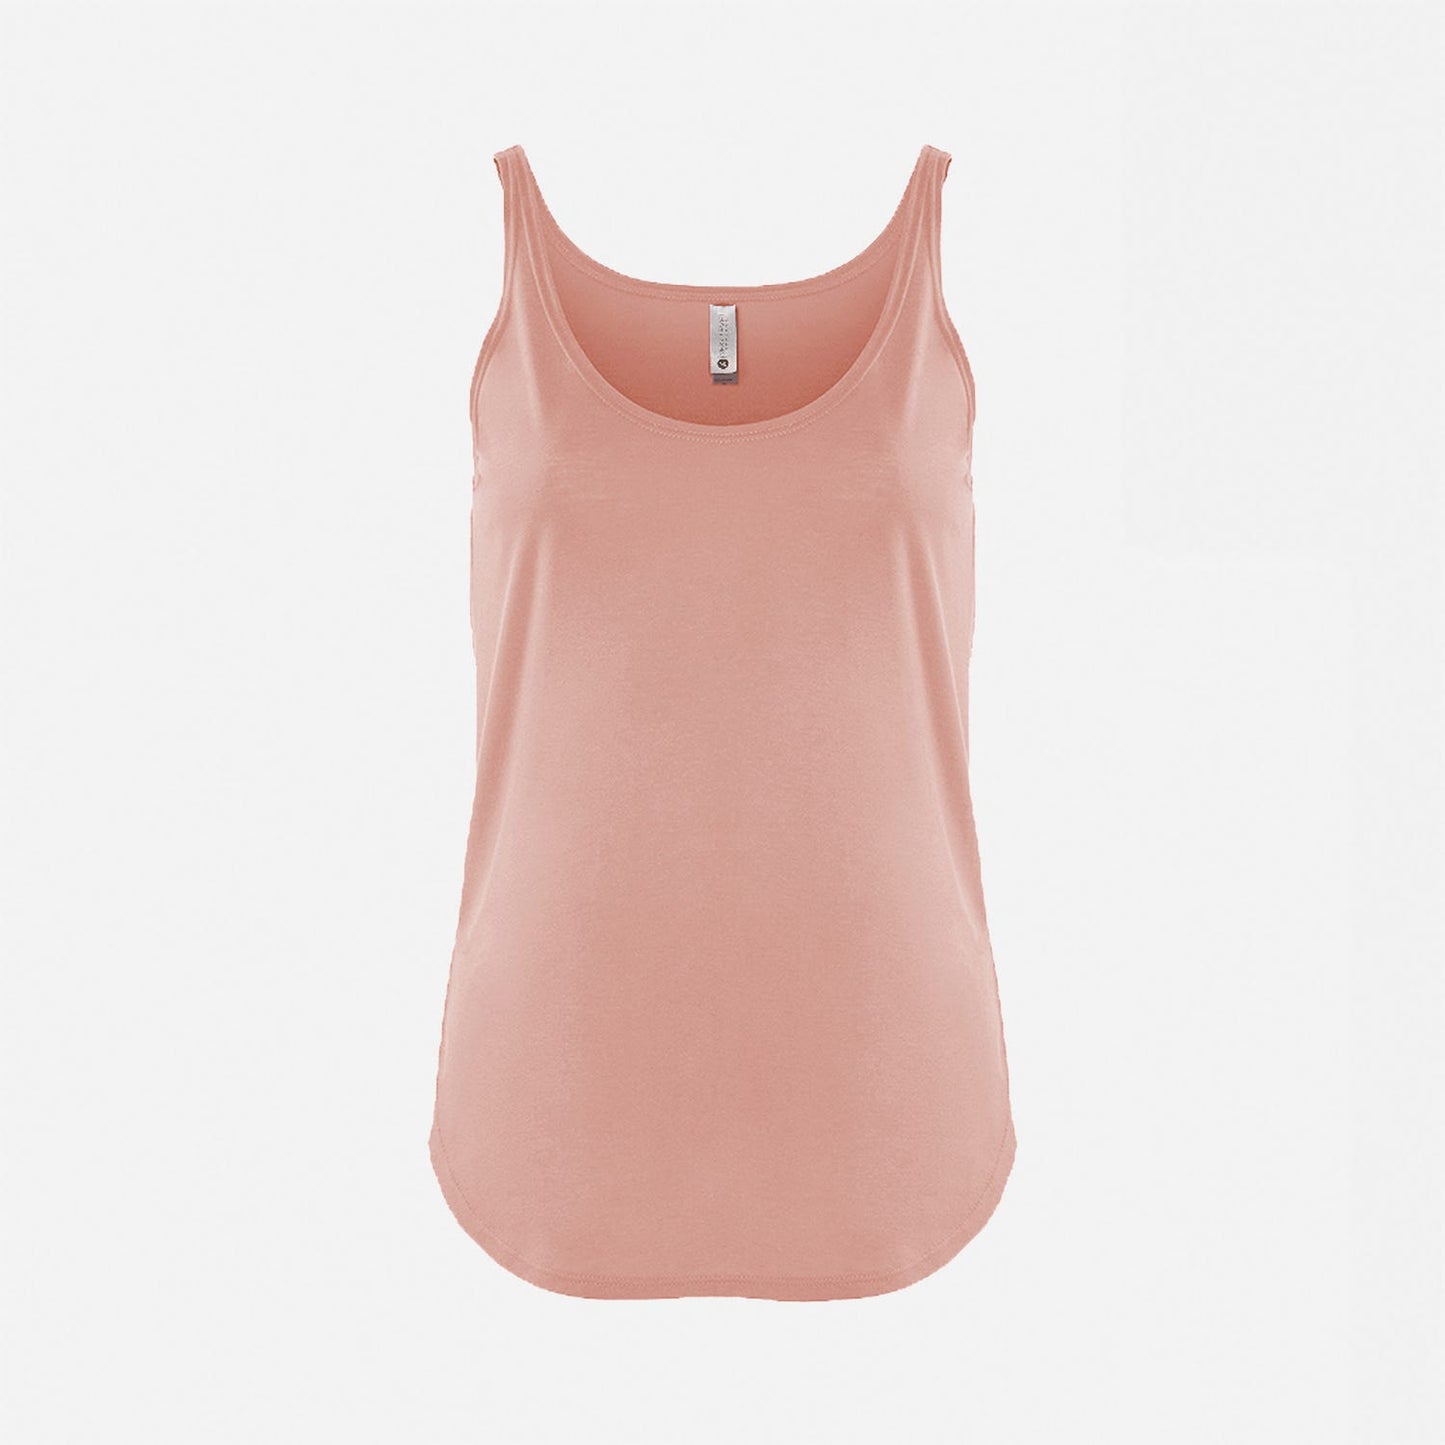 Next Level, Scoop Tank, In multiple colors